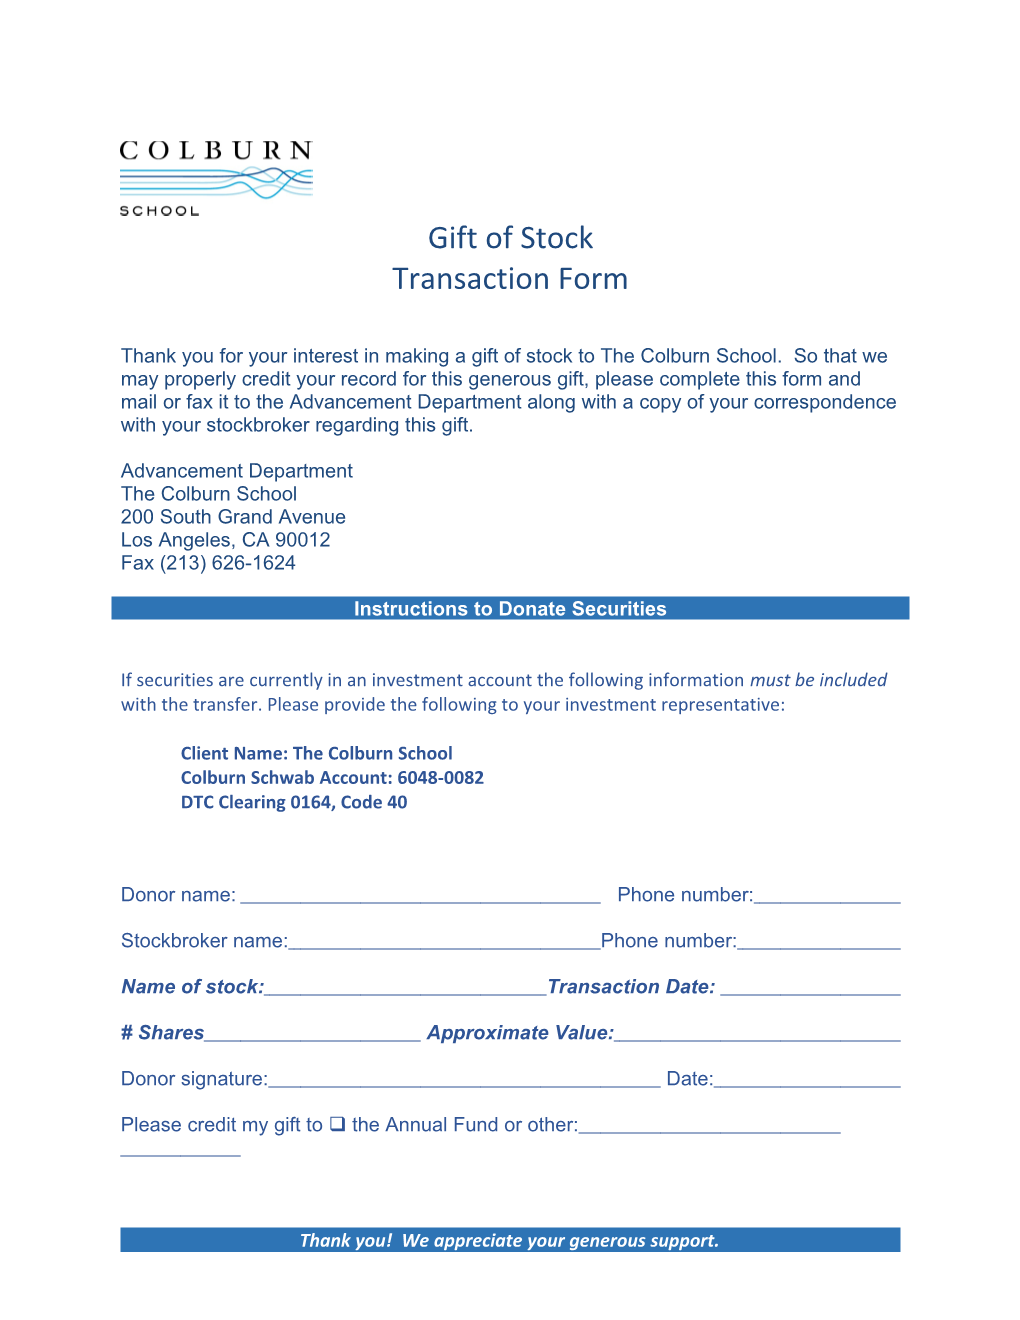 Gift of Stock Transaction Form